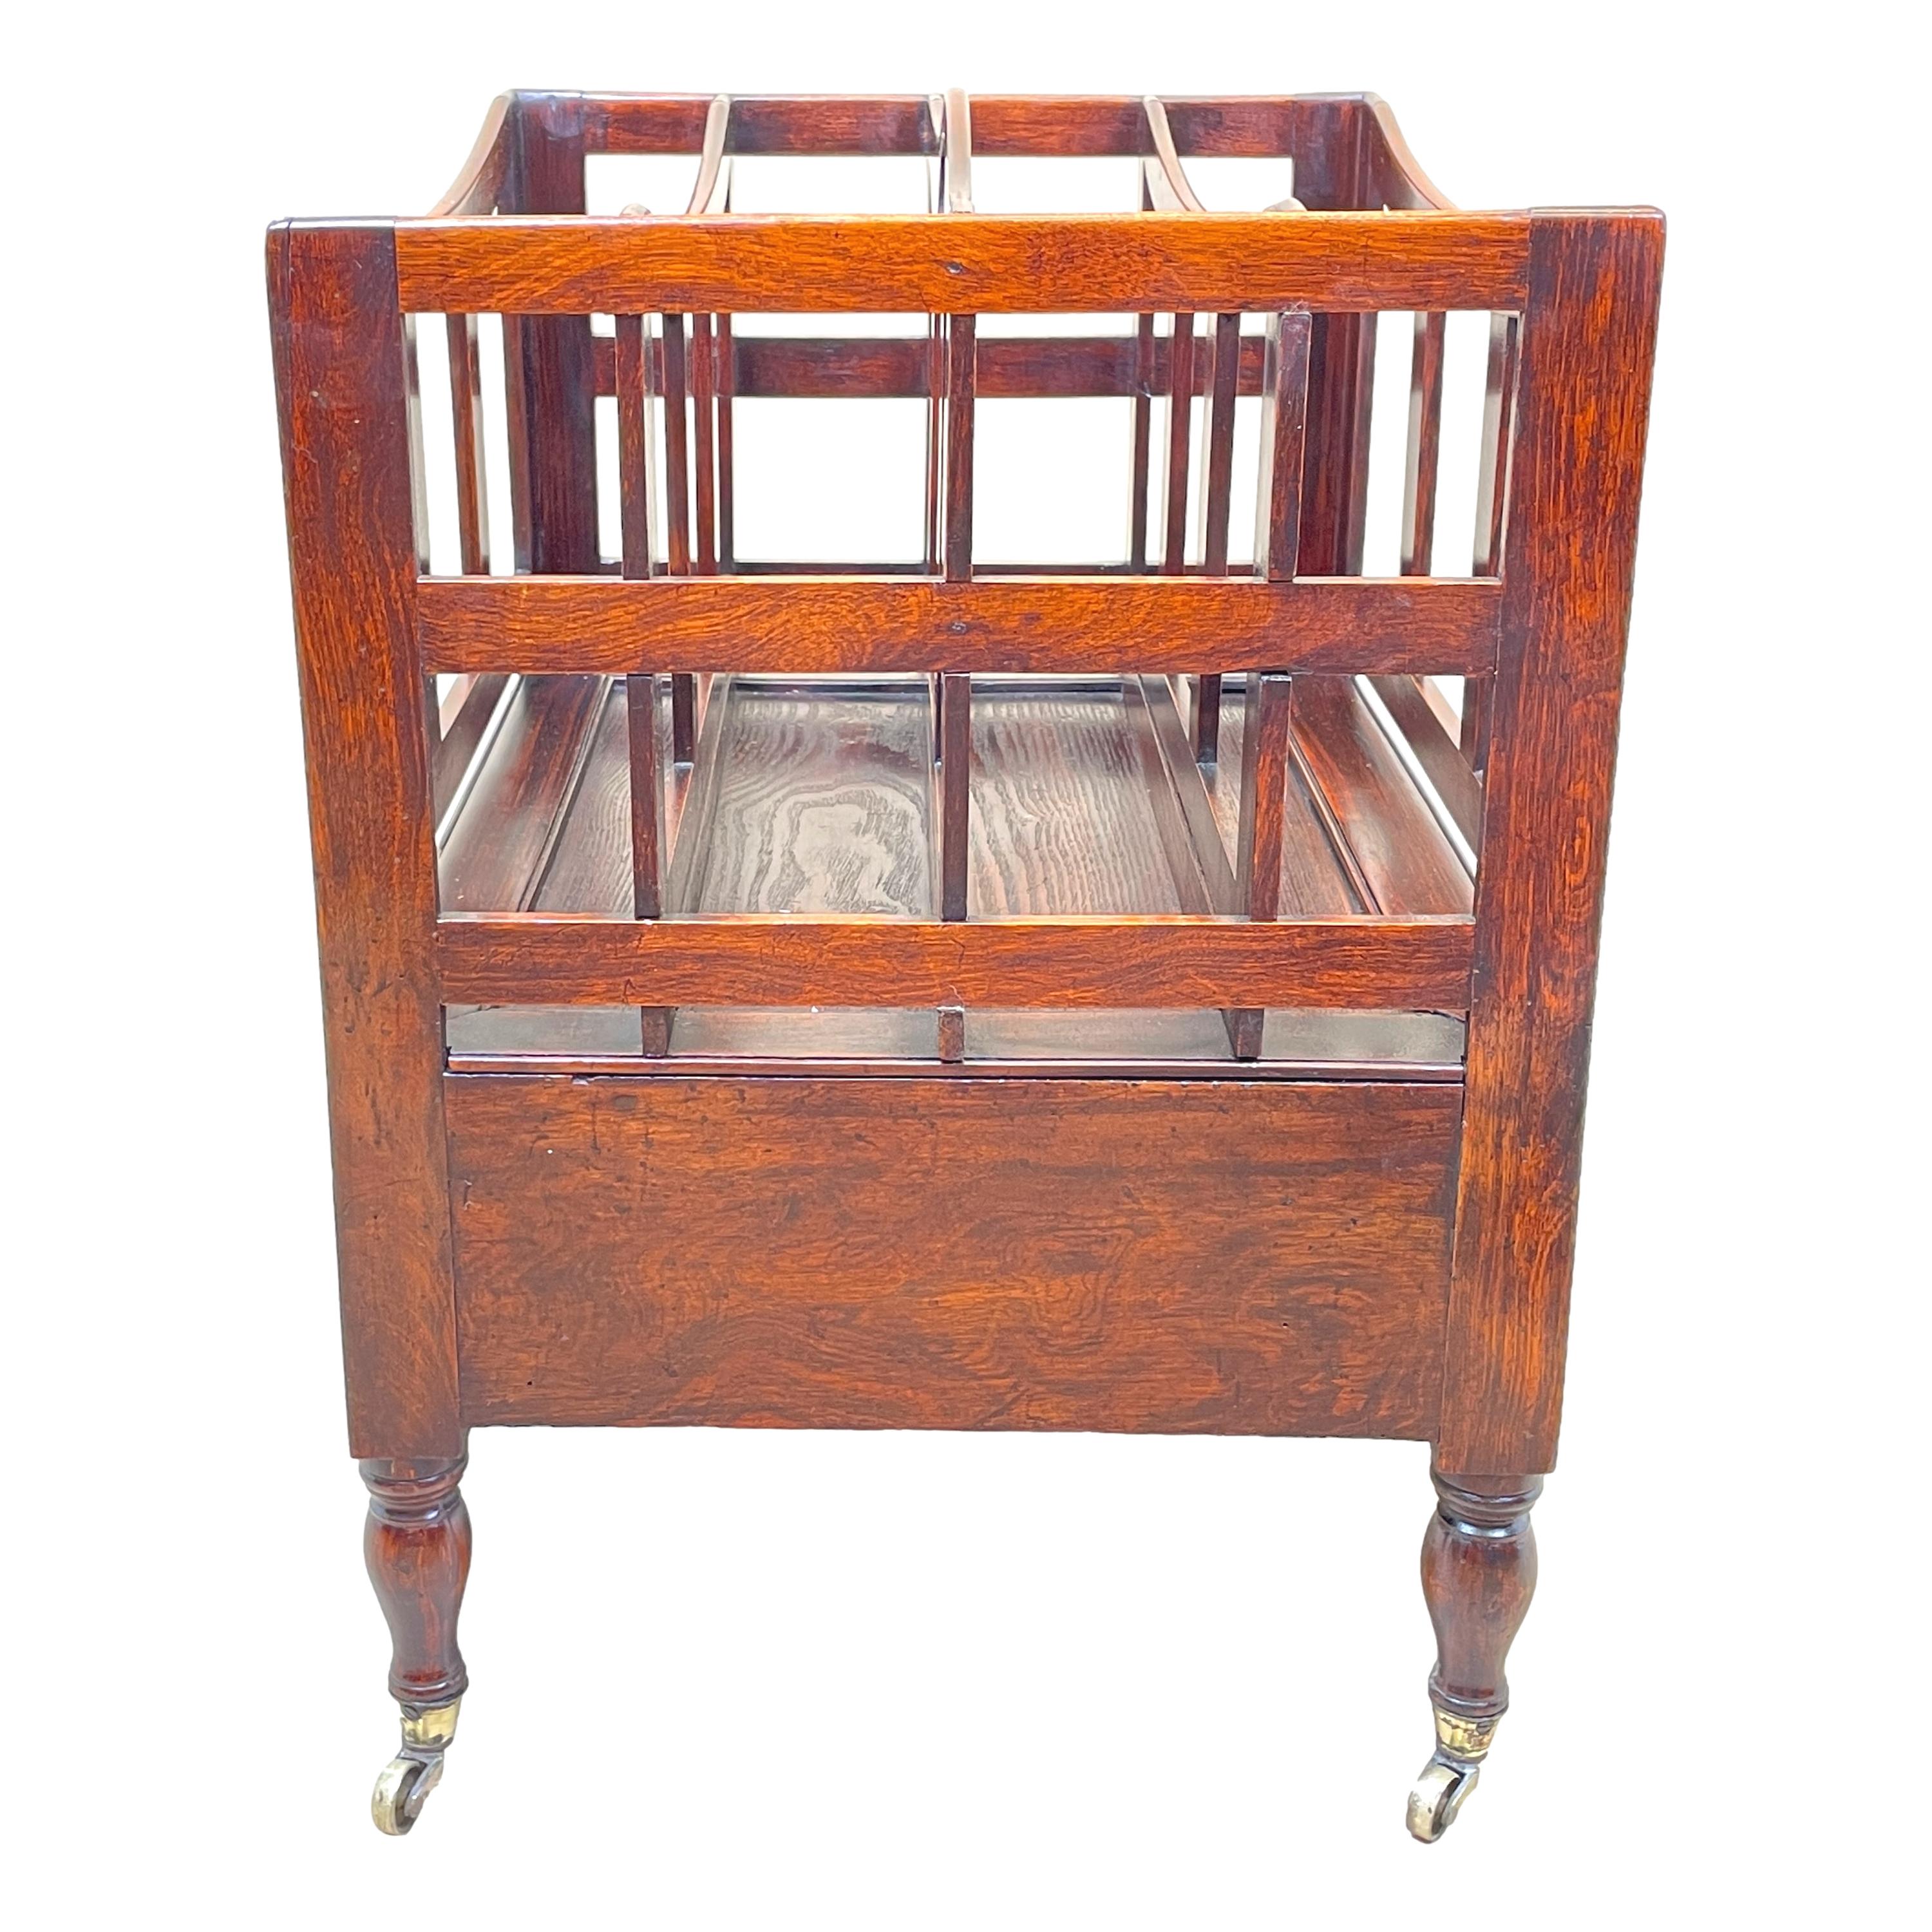 An early 19th century regency period simulated rosewood boat shaped Canterbury, having pierced carrying handle and divisions, over one frieze drawer with later brass handle, raised on elegant turned legs with original brass castors. 

This unusual